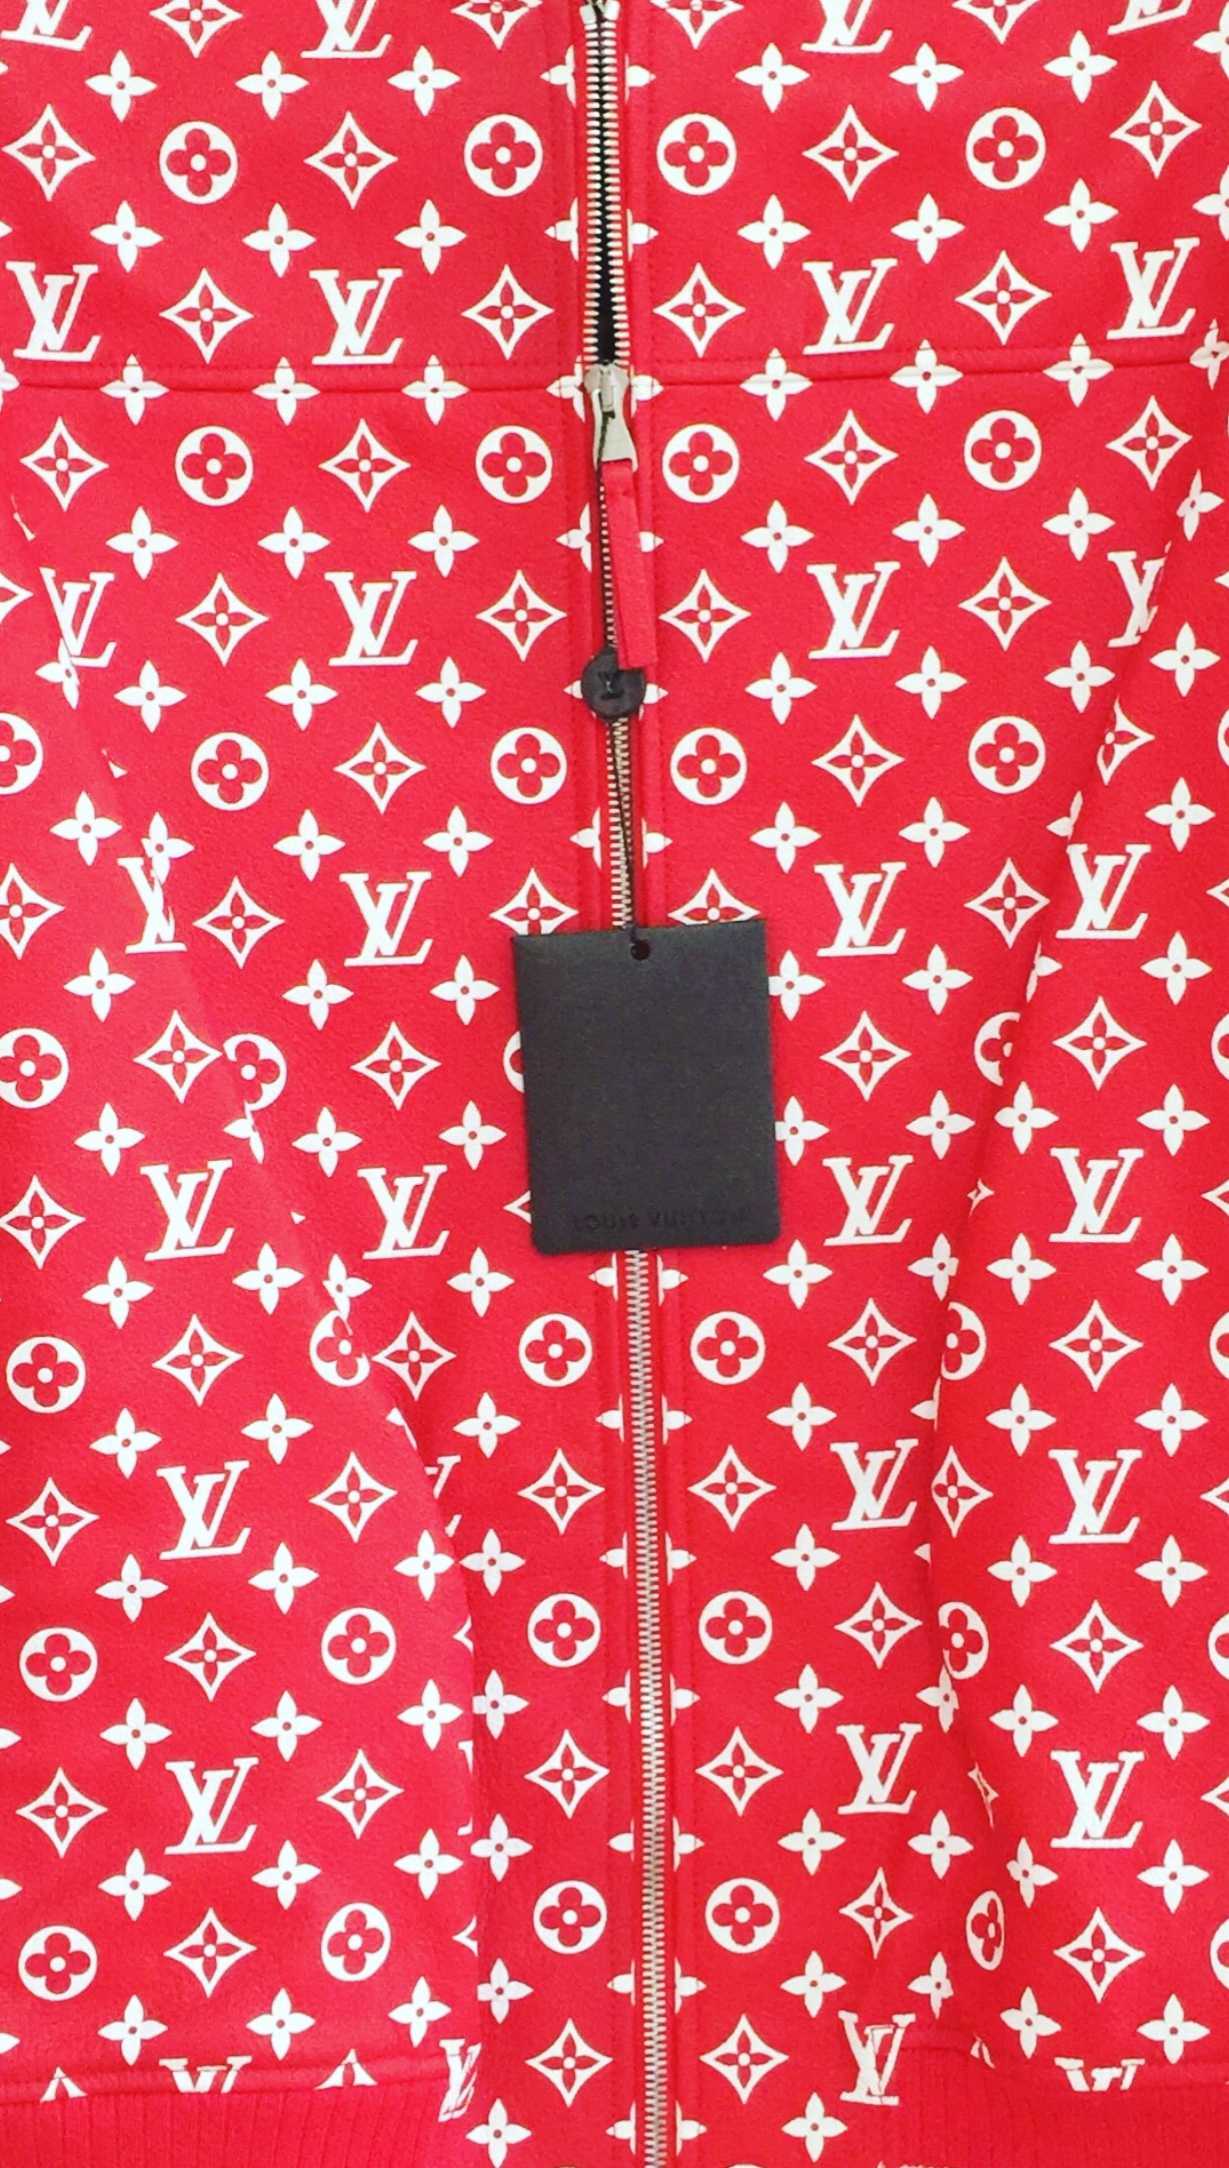 Sold at Auction: Supreme X Louis Vuitton Red Leather Baseball Jacket